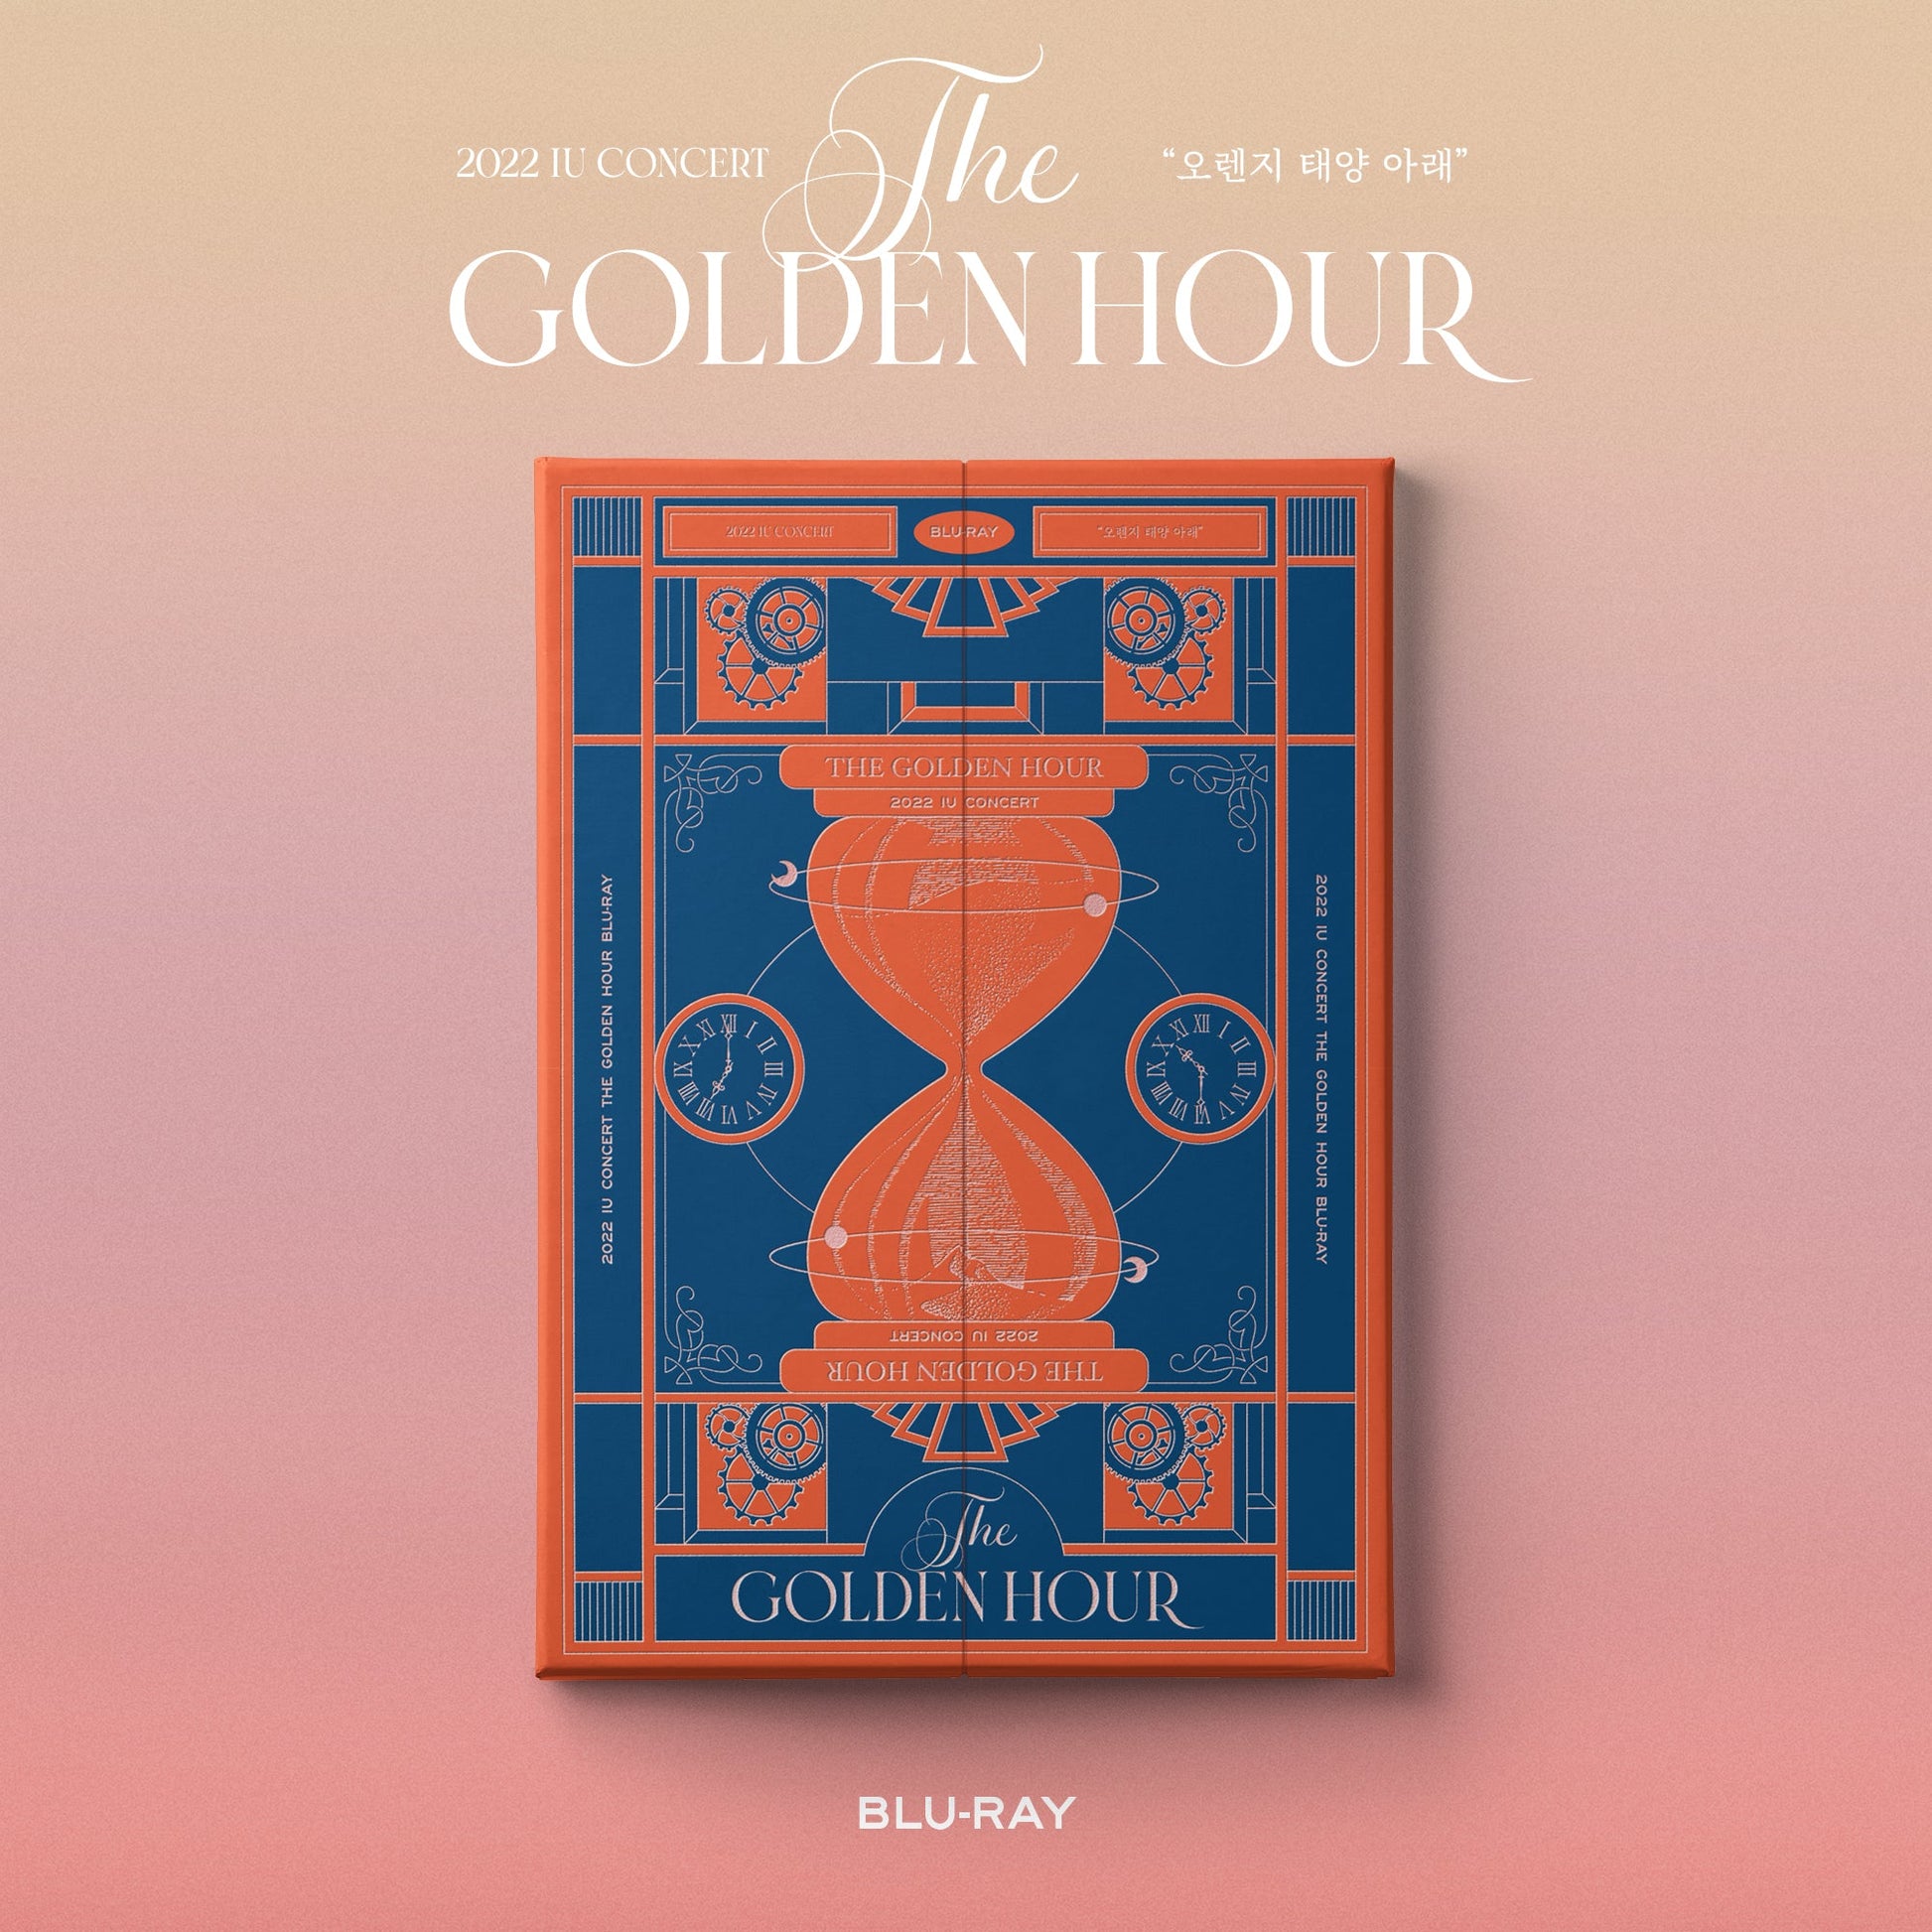 IU 2022 CONCERT 'THE GOLDEN HOUR' BLU-RAY COVER